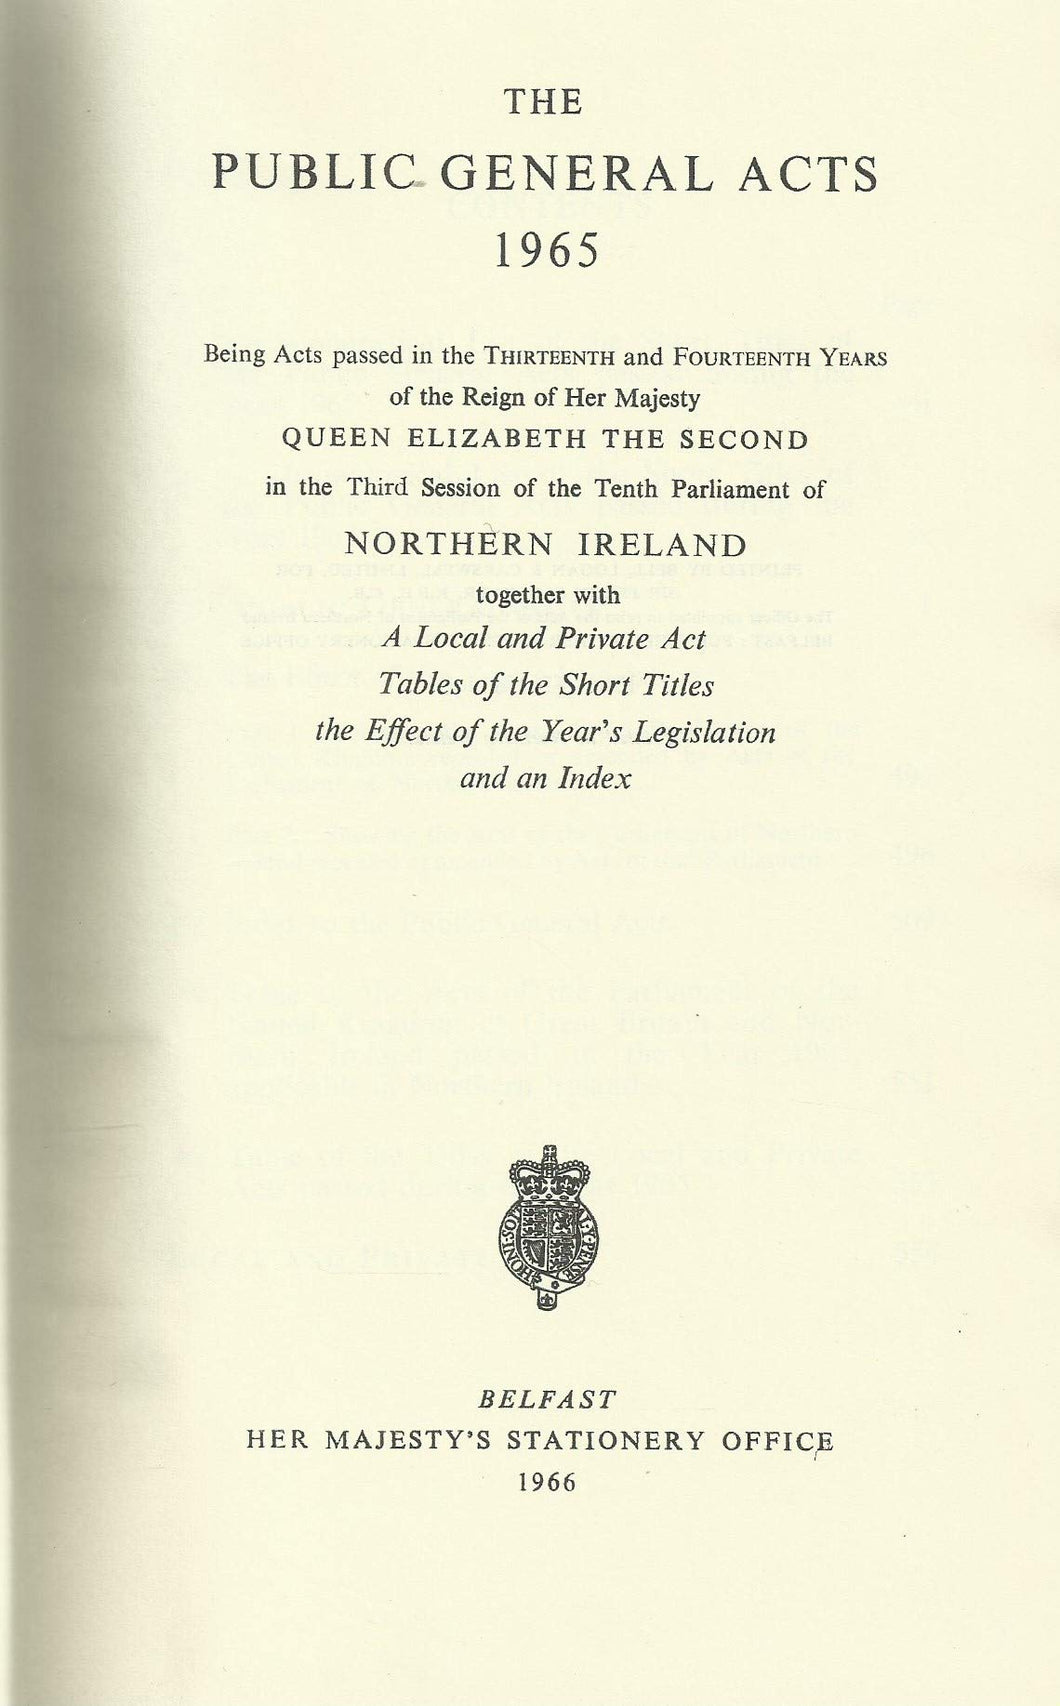 Northern Ireland - The Public General Acts 1965